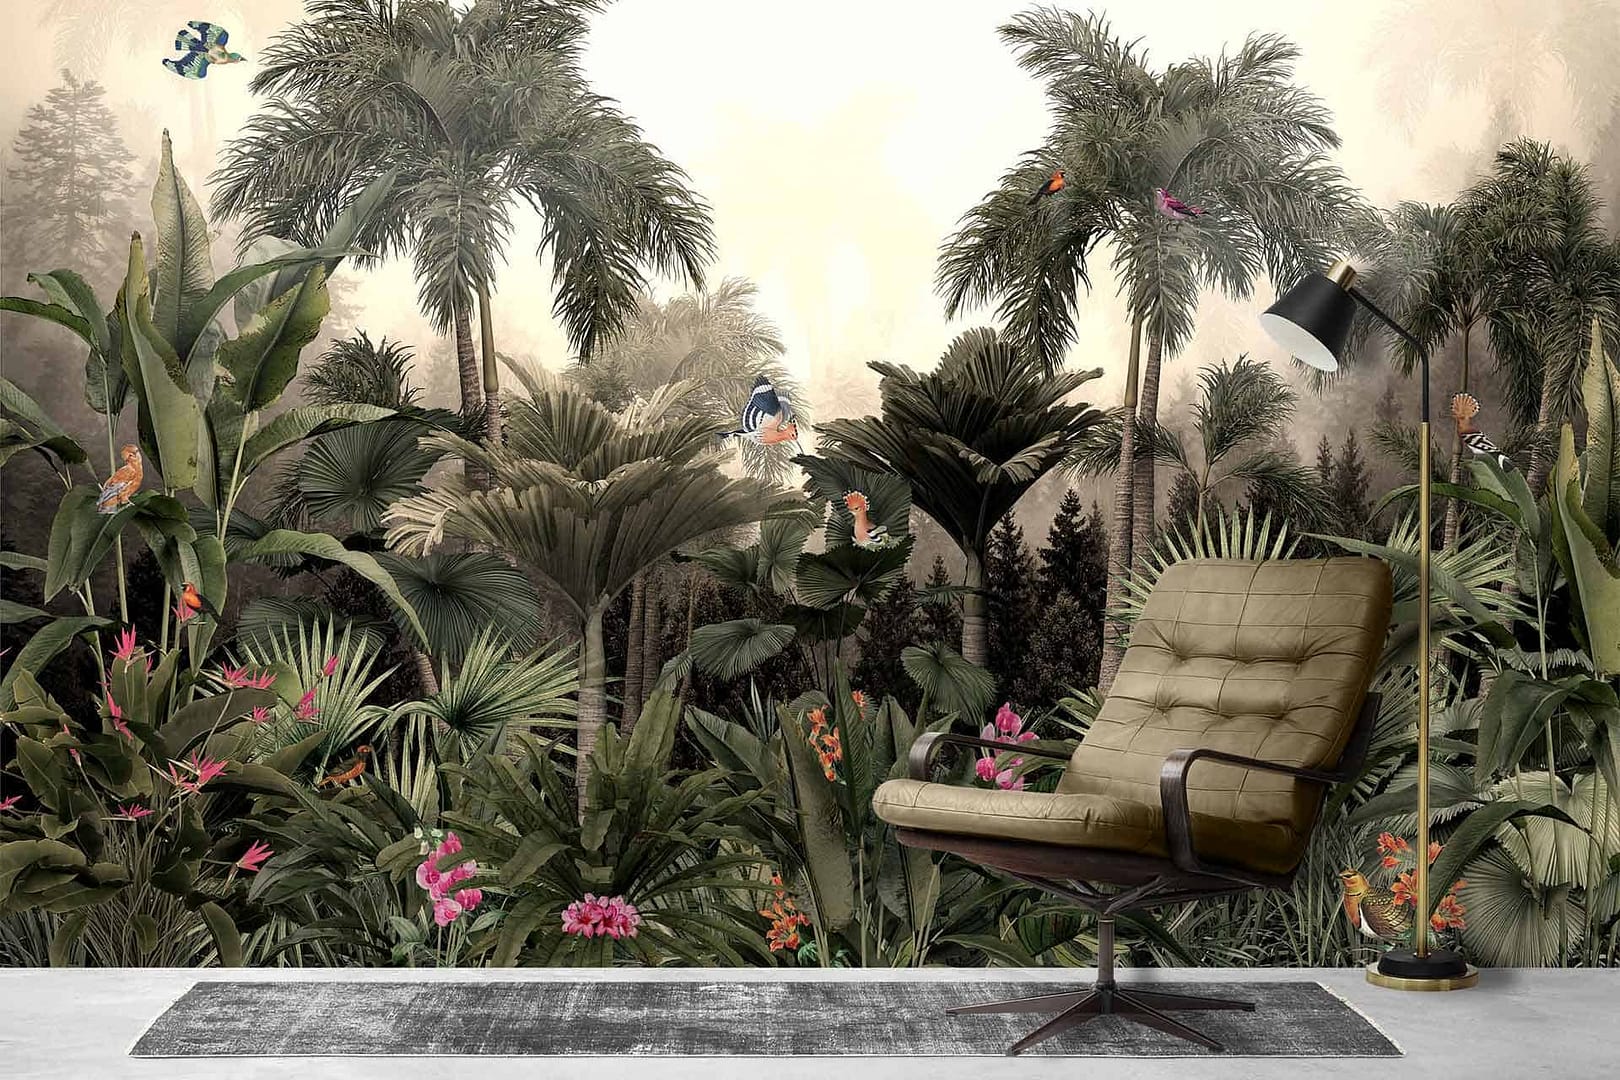 Mainstay - a wallpaperof a tropical jungle scene, with dark plants and bright flowers and birds by Cara Saven Wall Design